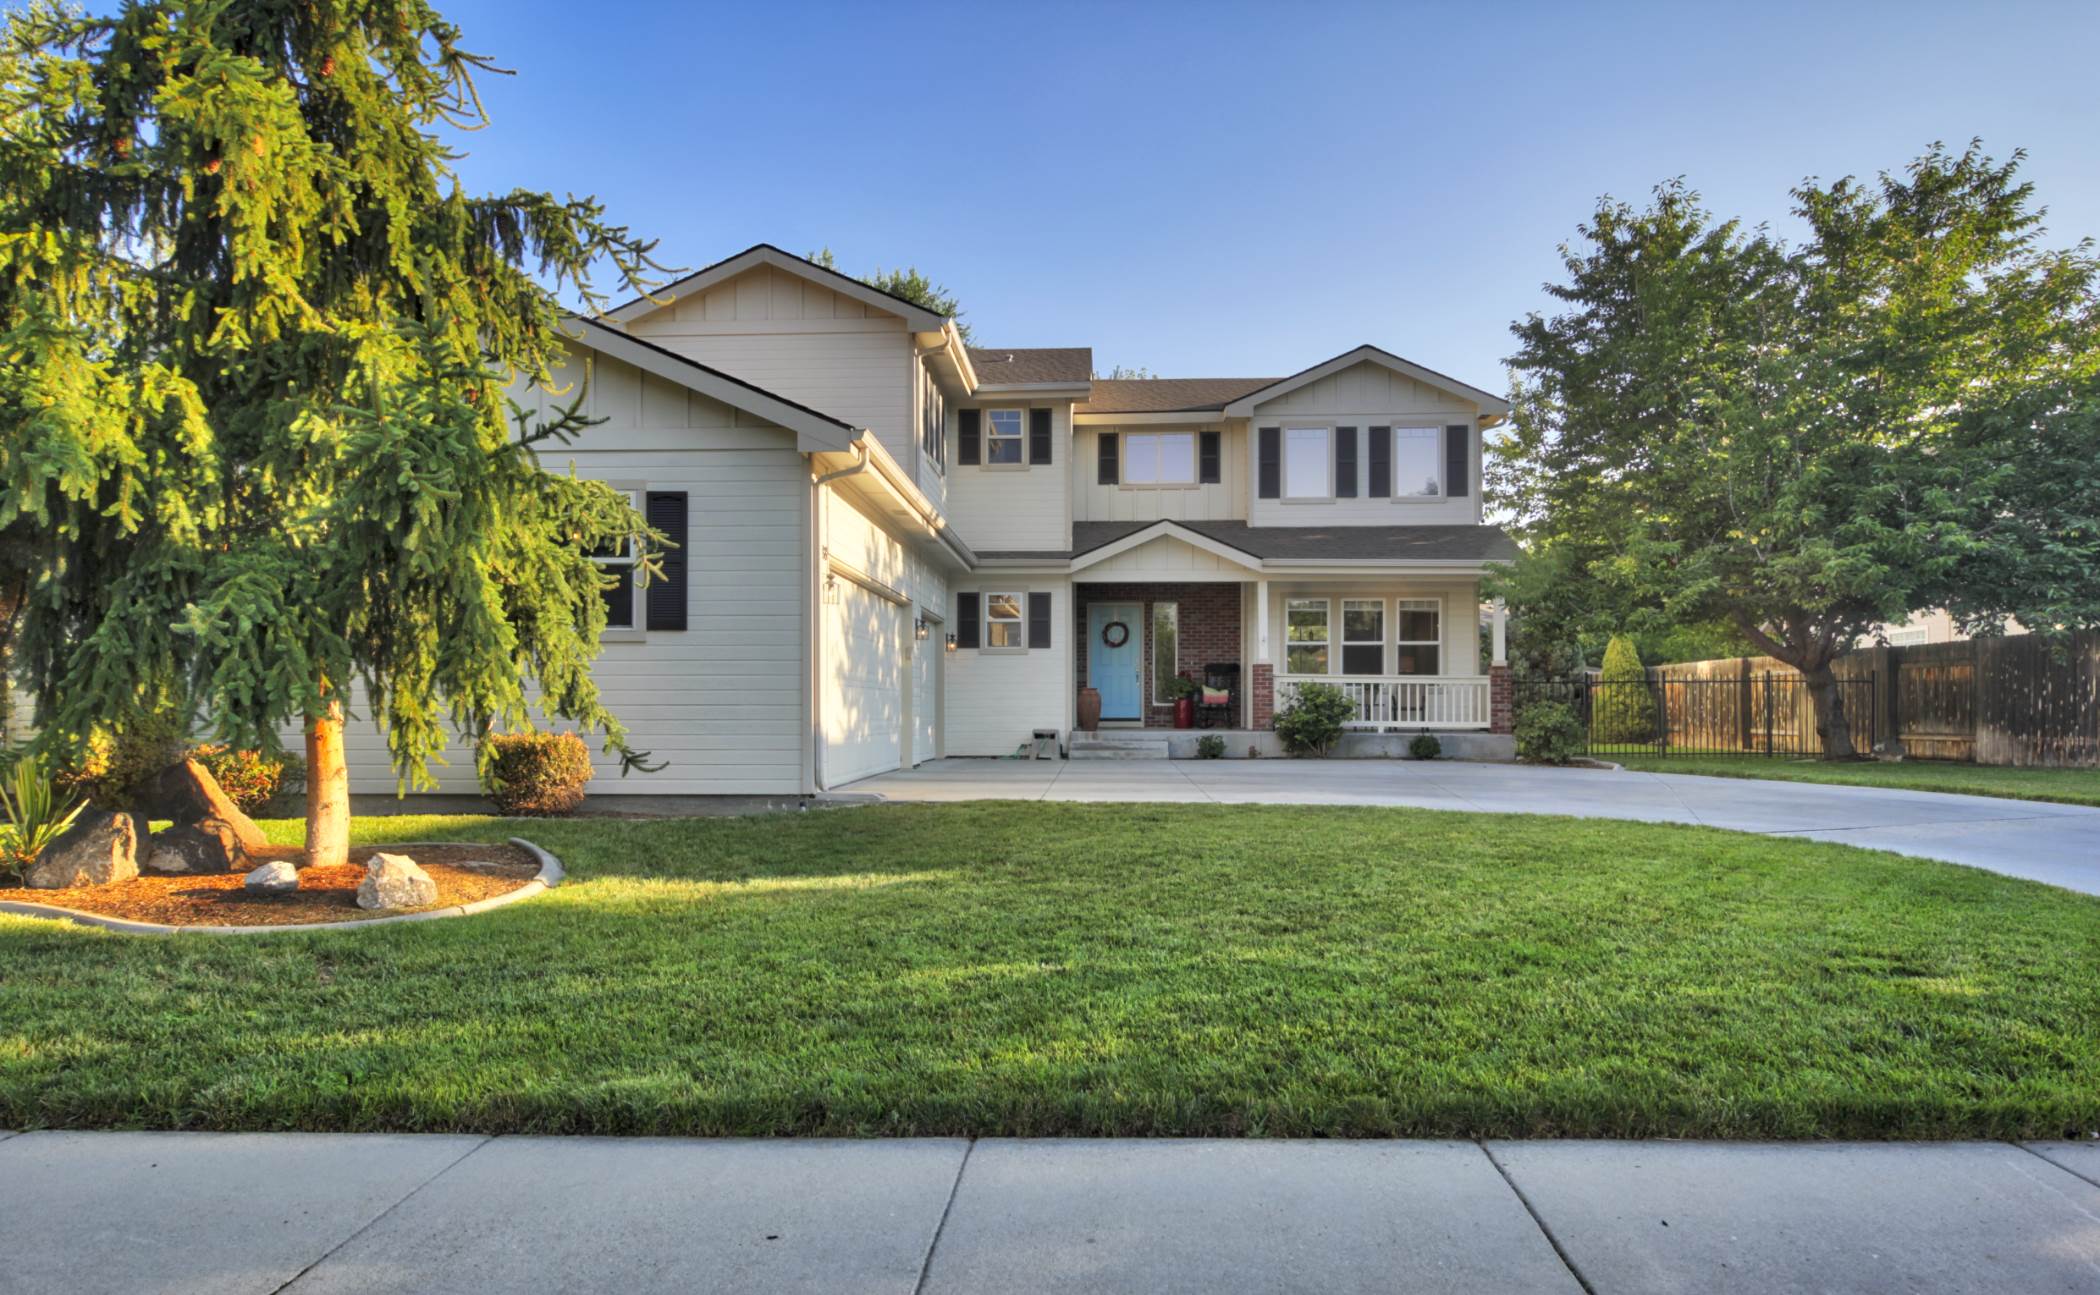 11088 W. Divide Pass, Boise, ID 83709